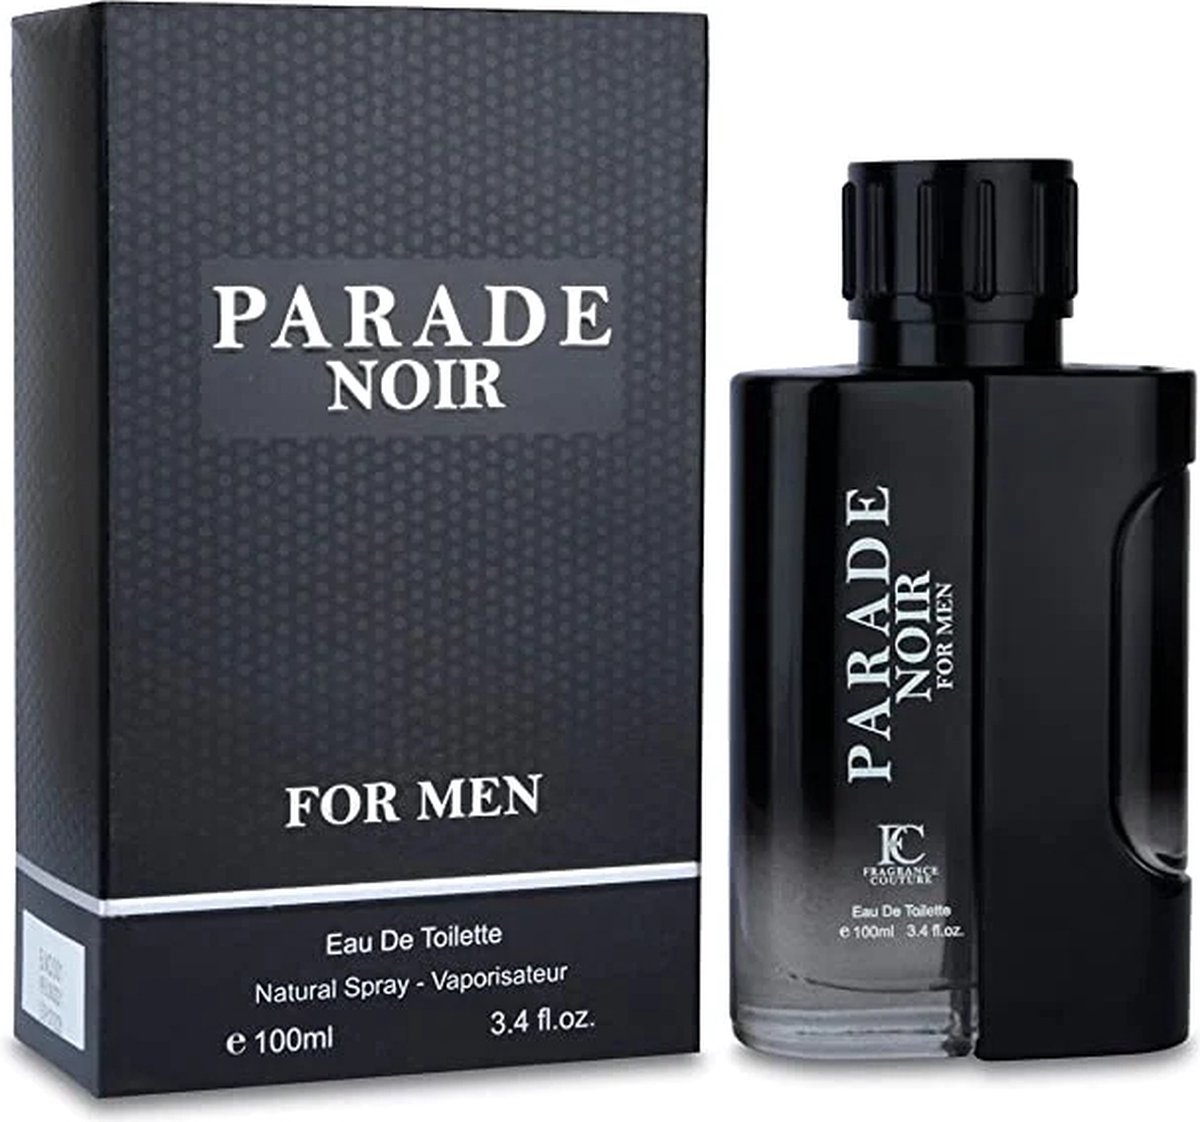 Parade Noir for him by FC